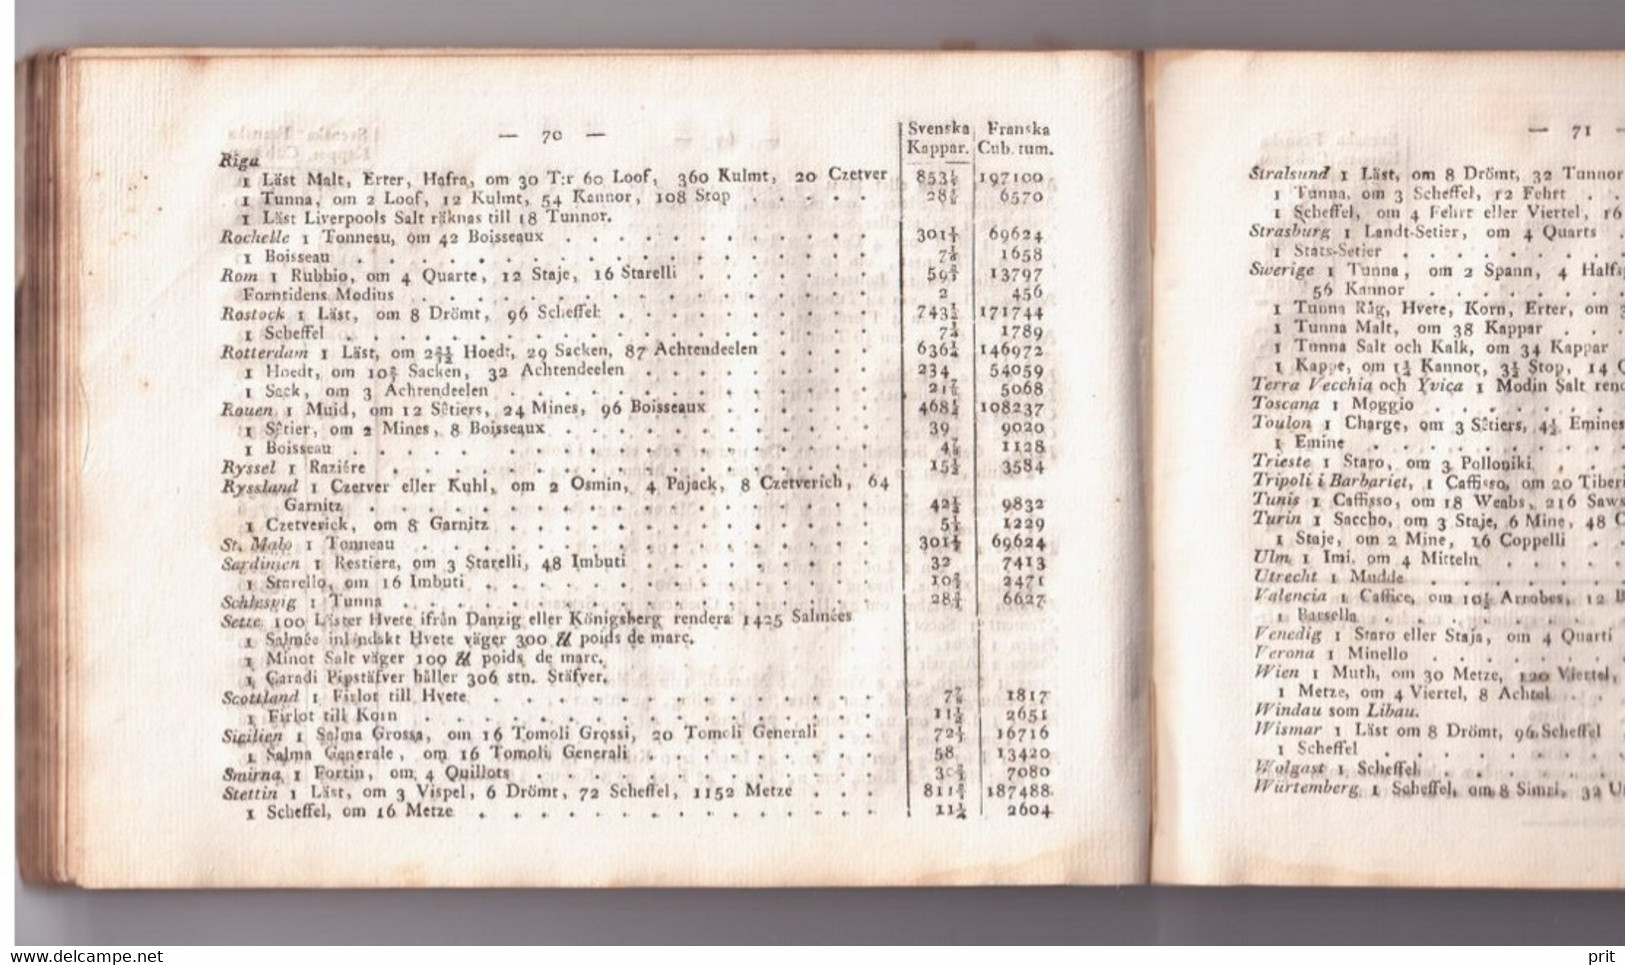 Tables representing the relationship between Sweden & other countries Coins Weights Measures 1813 book C.L.Jöran Sweden